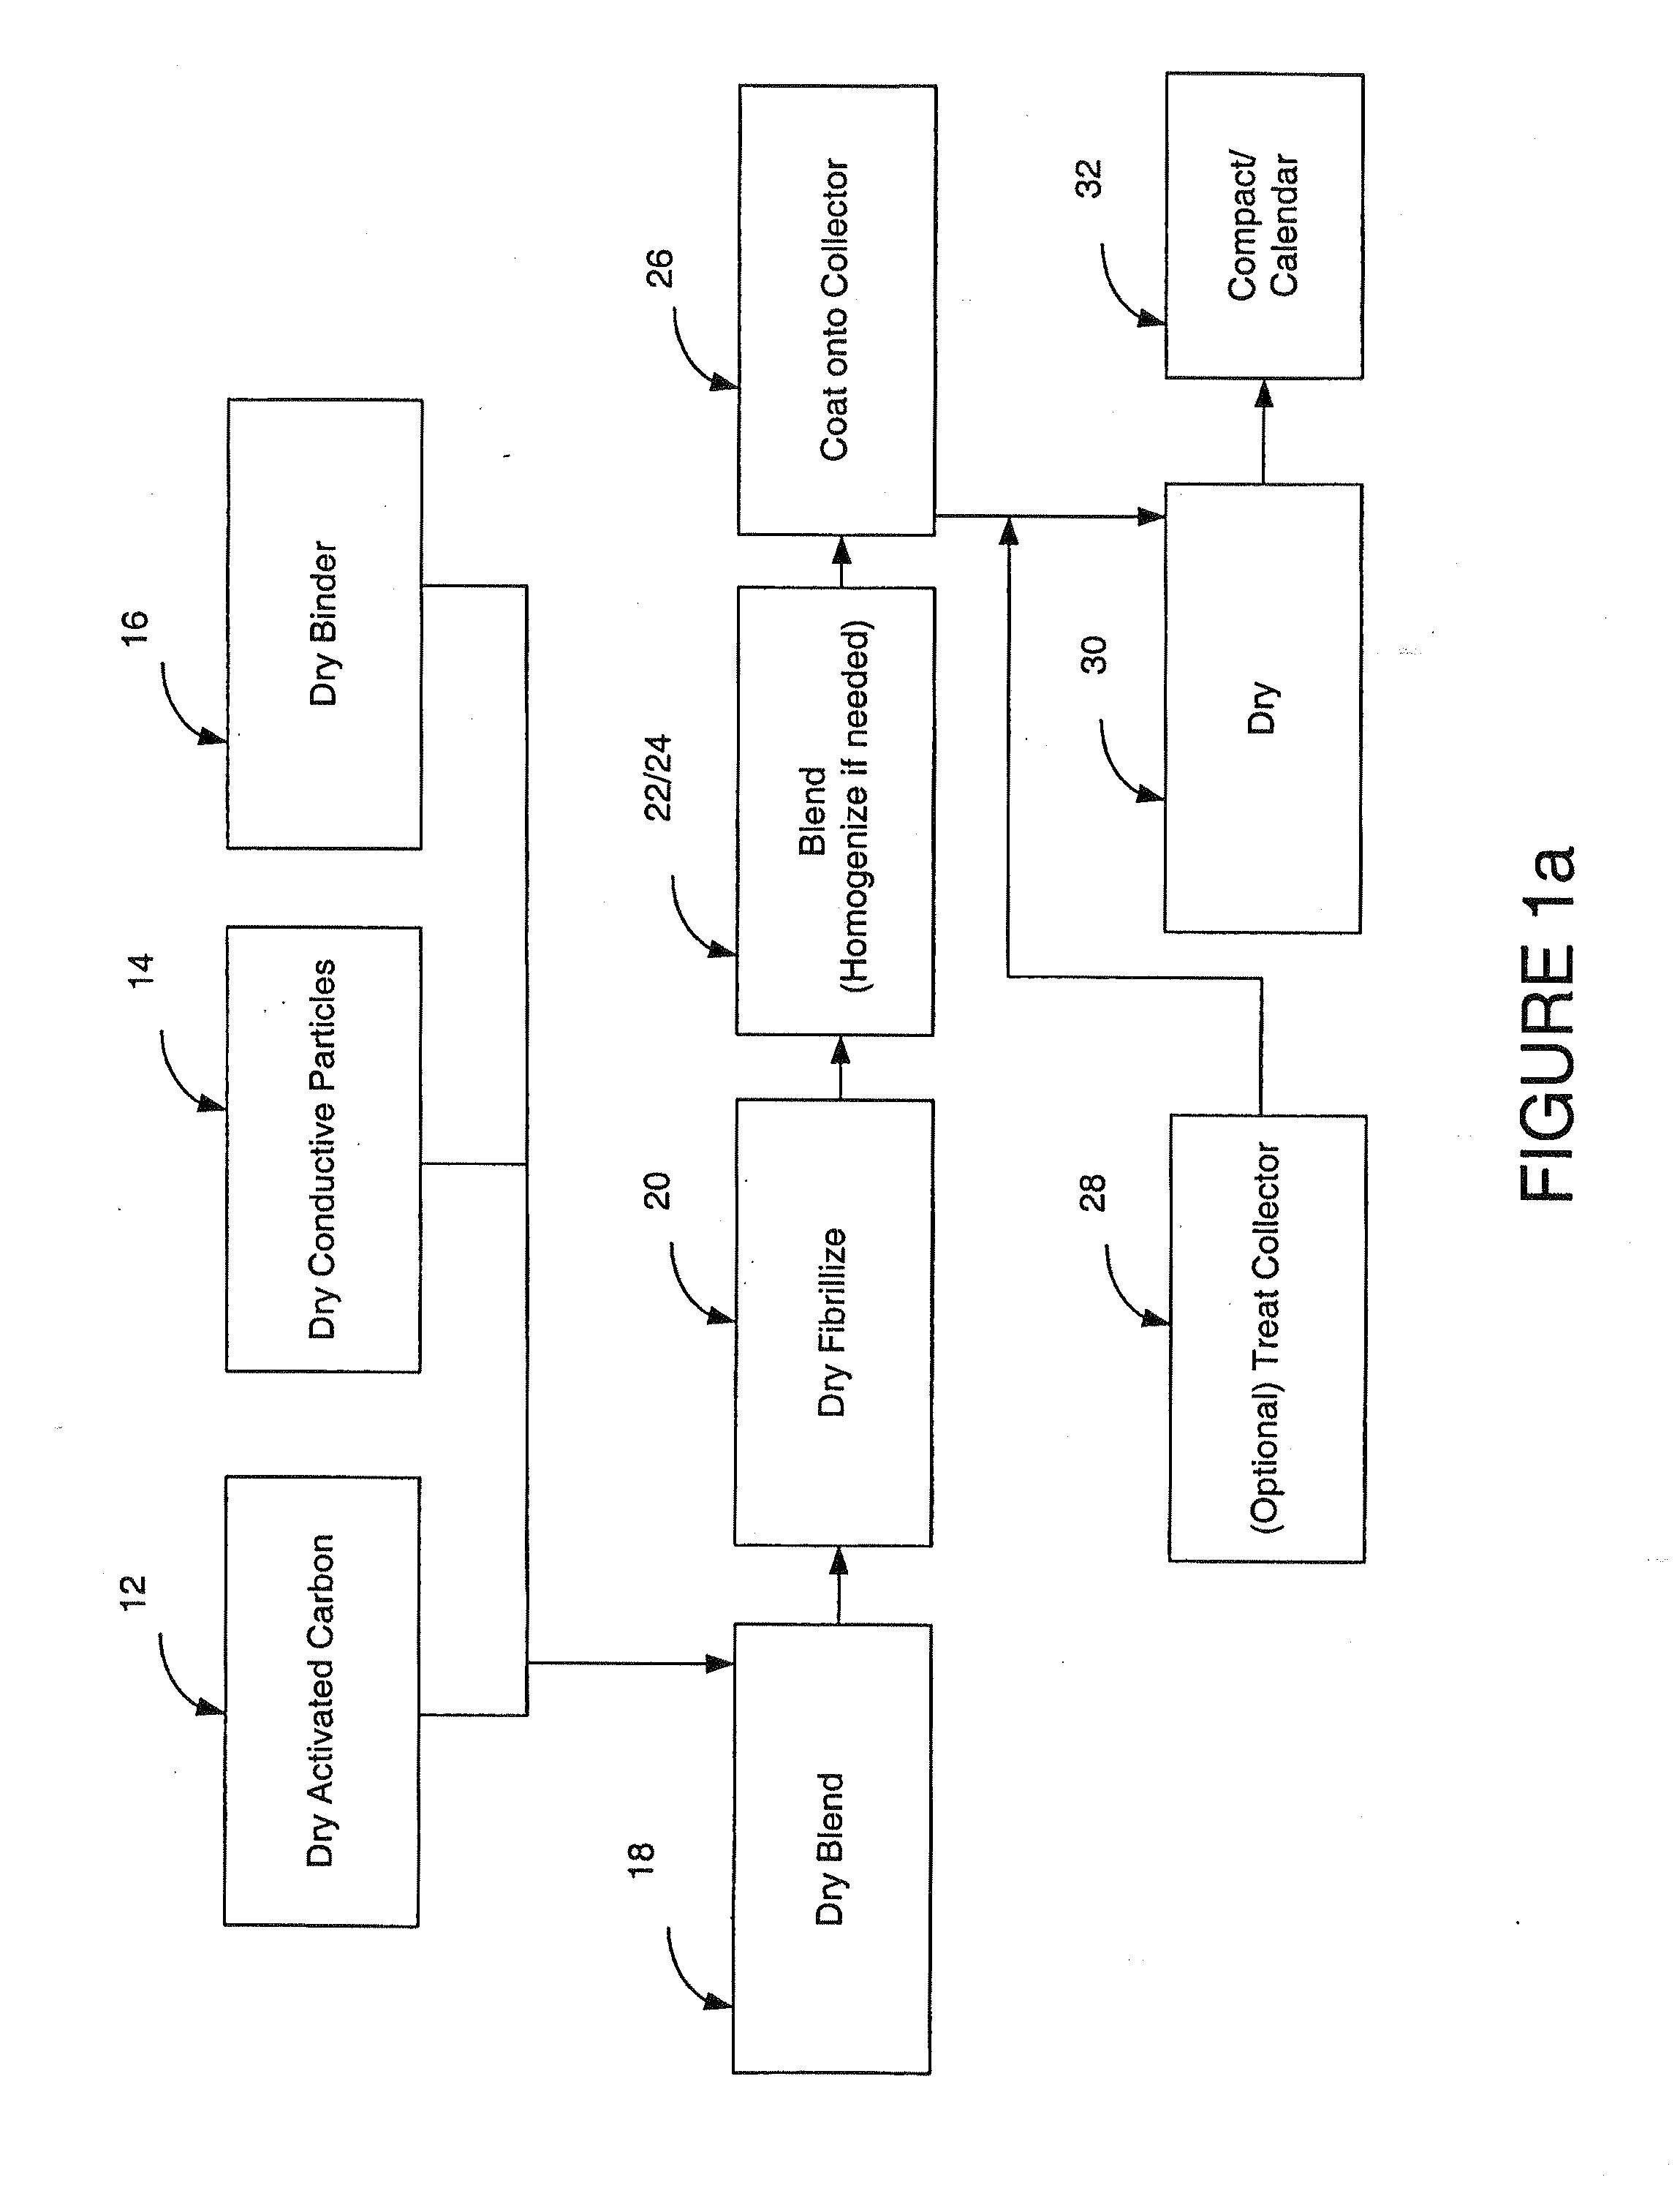 Dry Particle Based Adhesive Electrode and Methods of Making Same